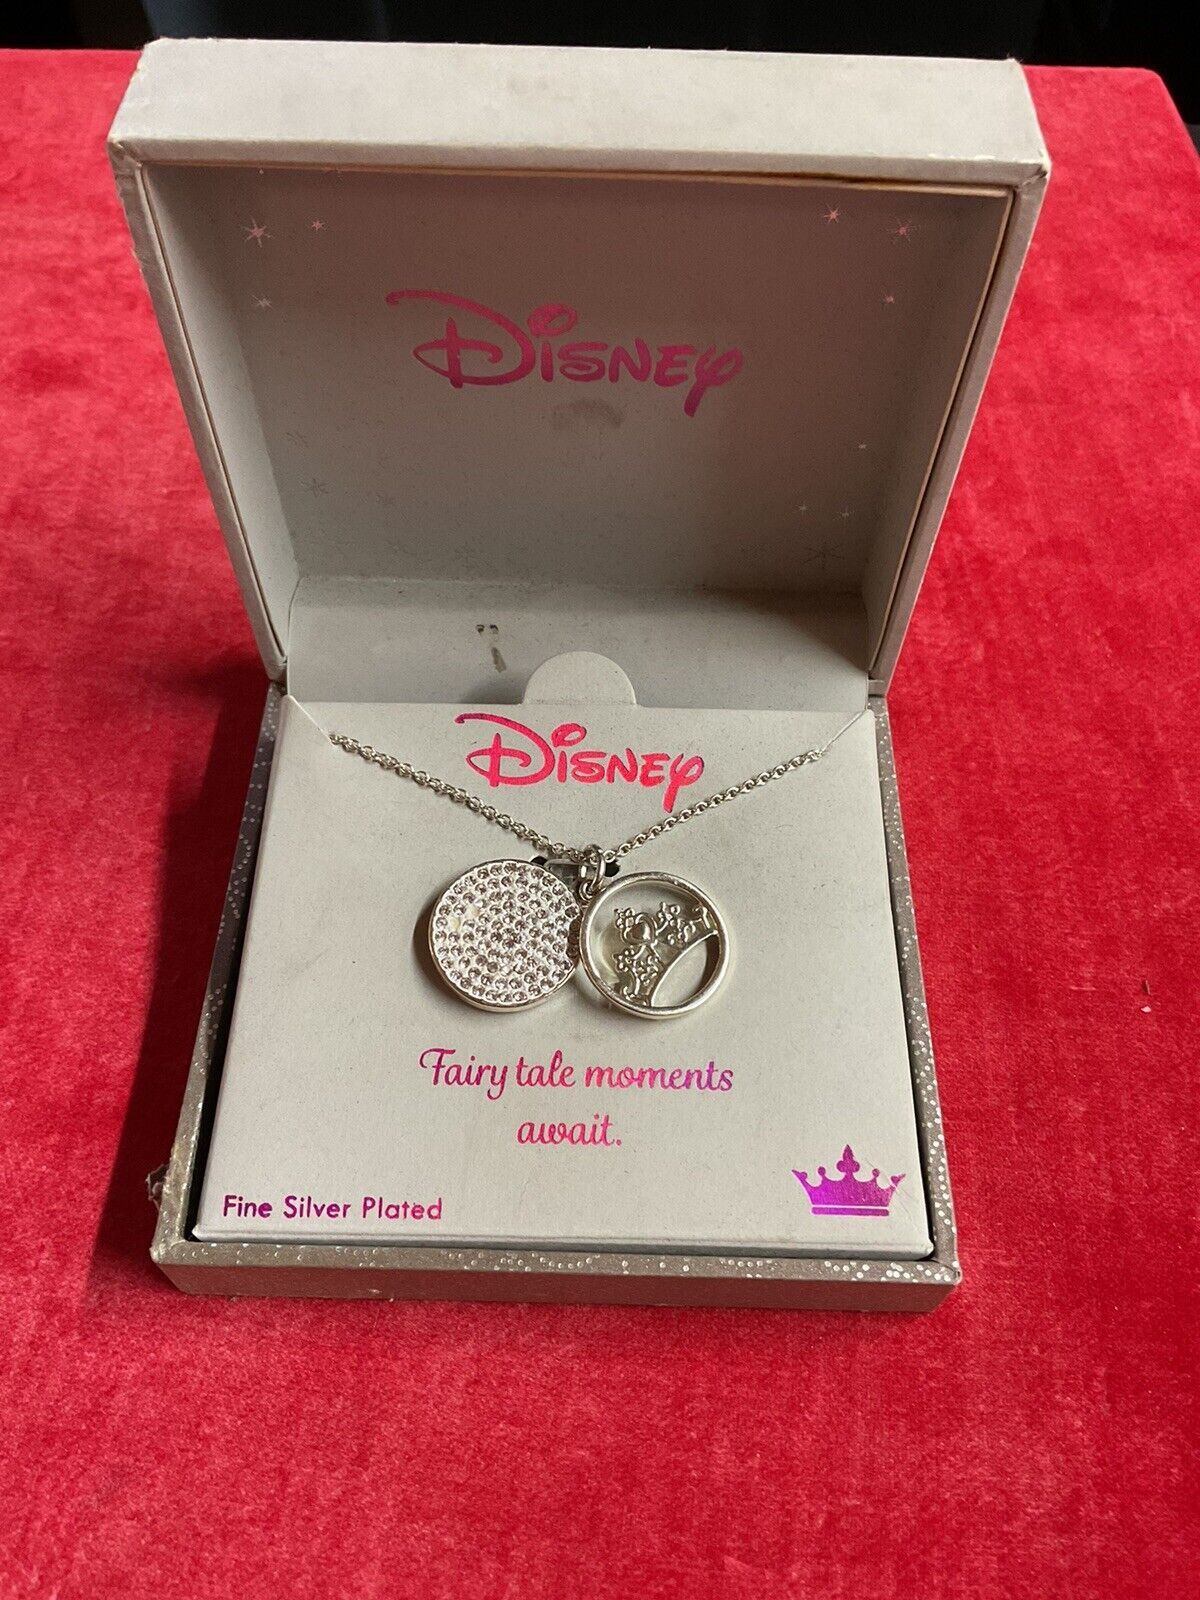 Disney Fairy Tale Moments Await Crown And Crystal Pendant Necklace.  NIB